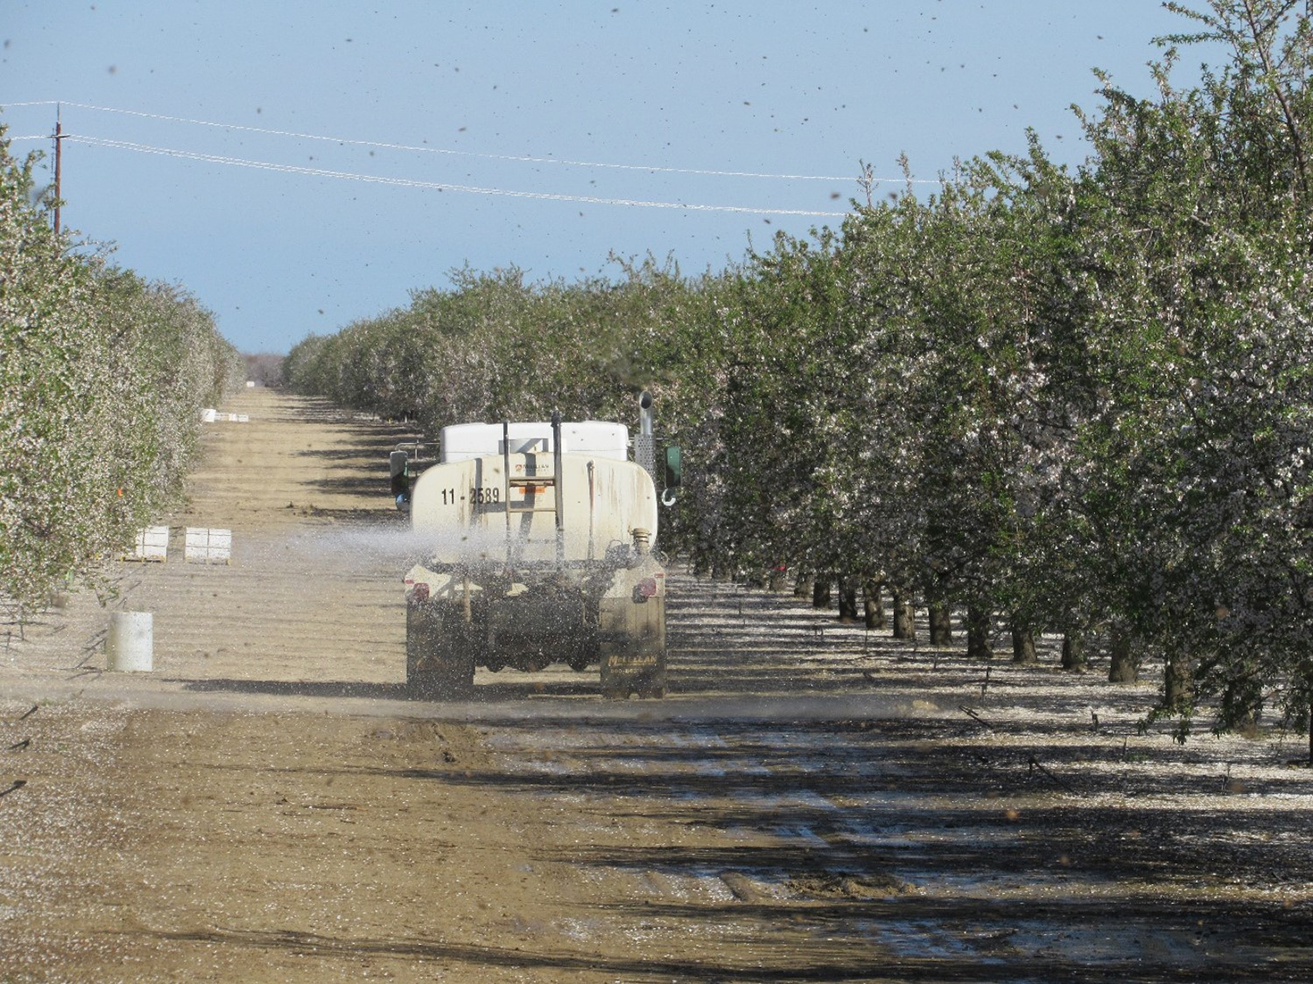 Water truck adding water to almond orchard